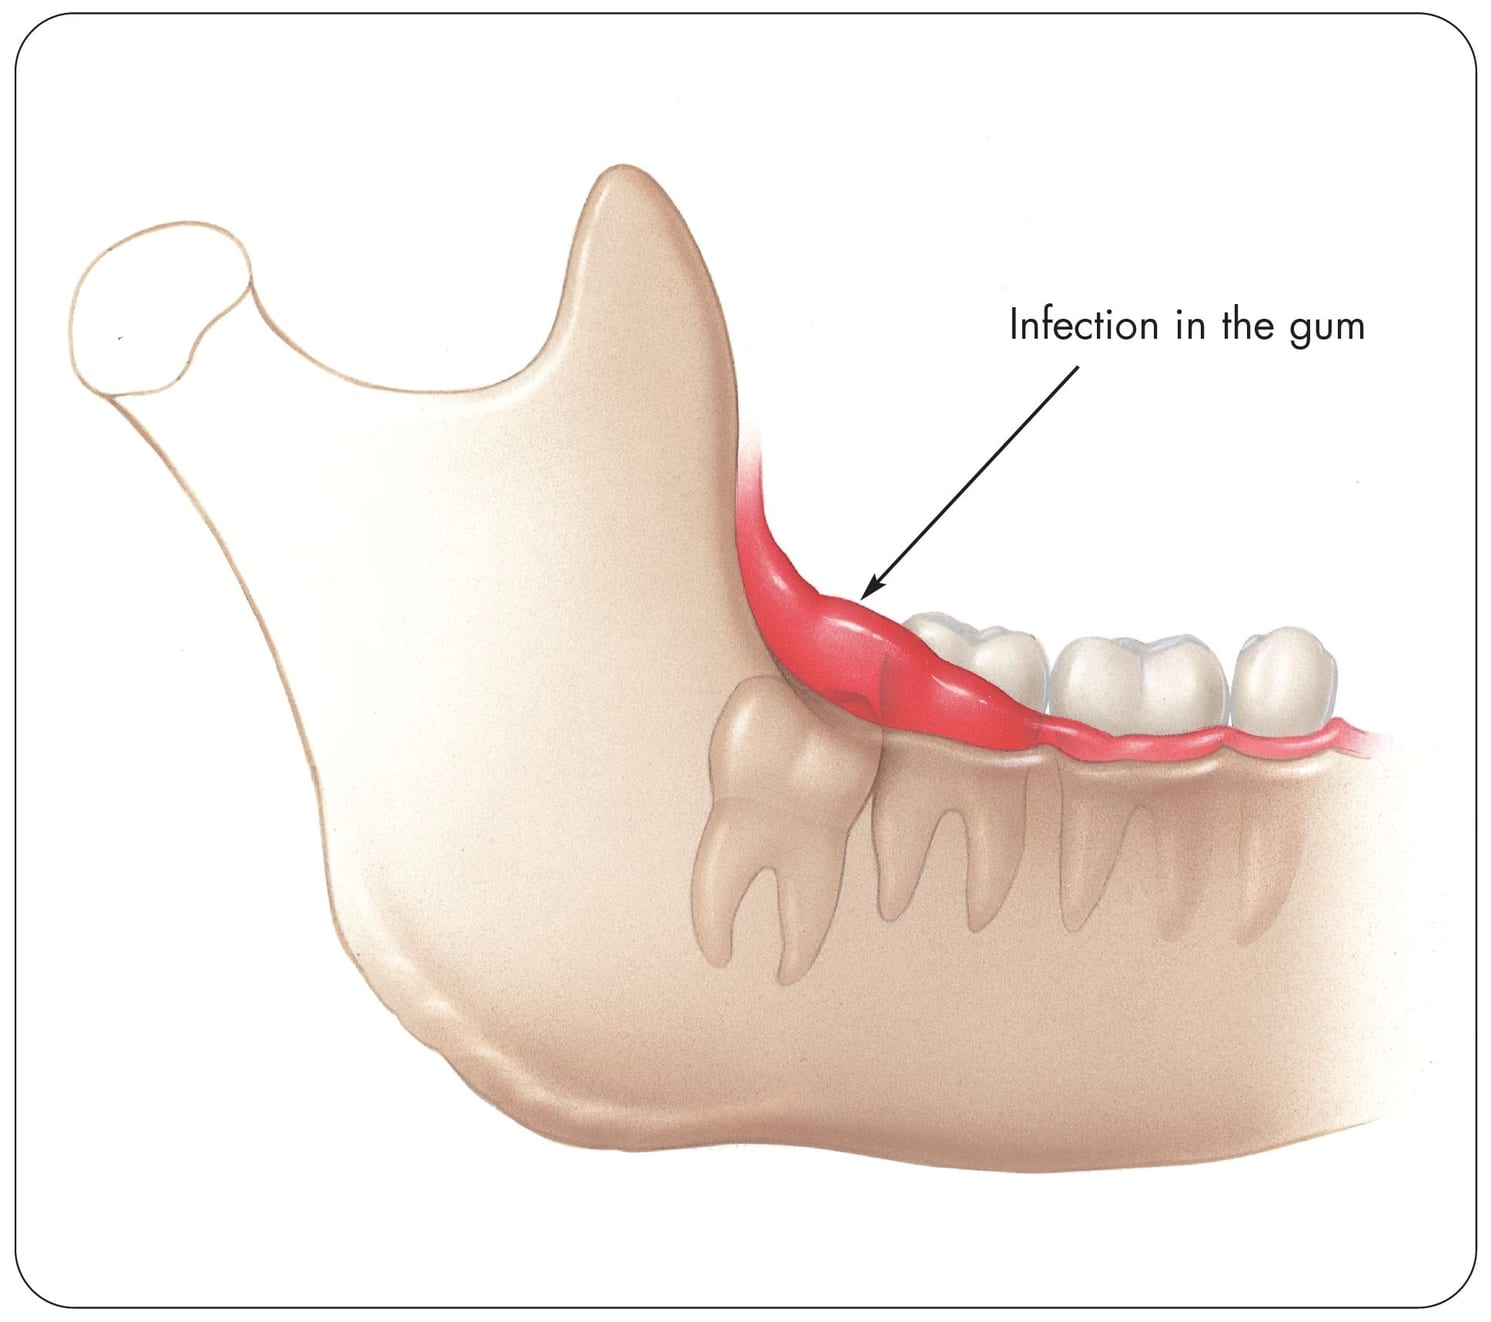 Special problems of impacted wisdom teeth